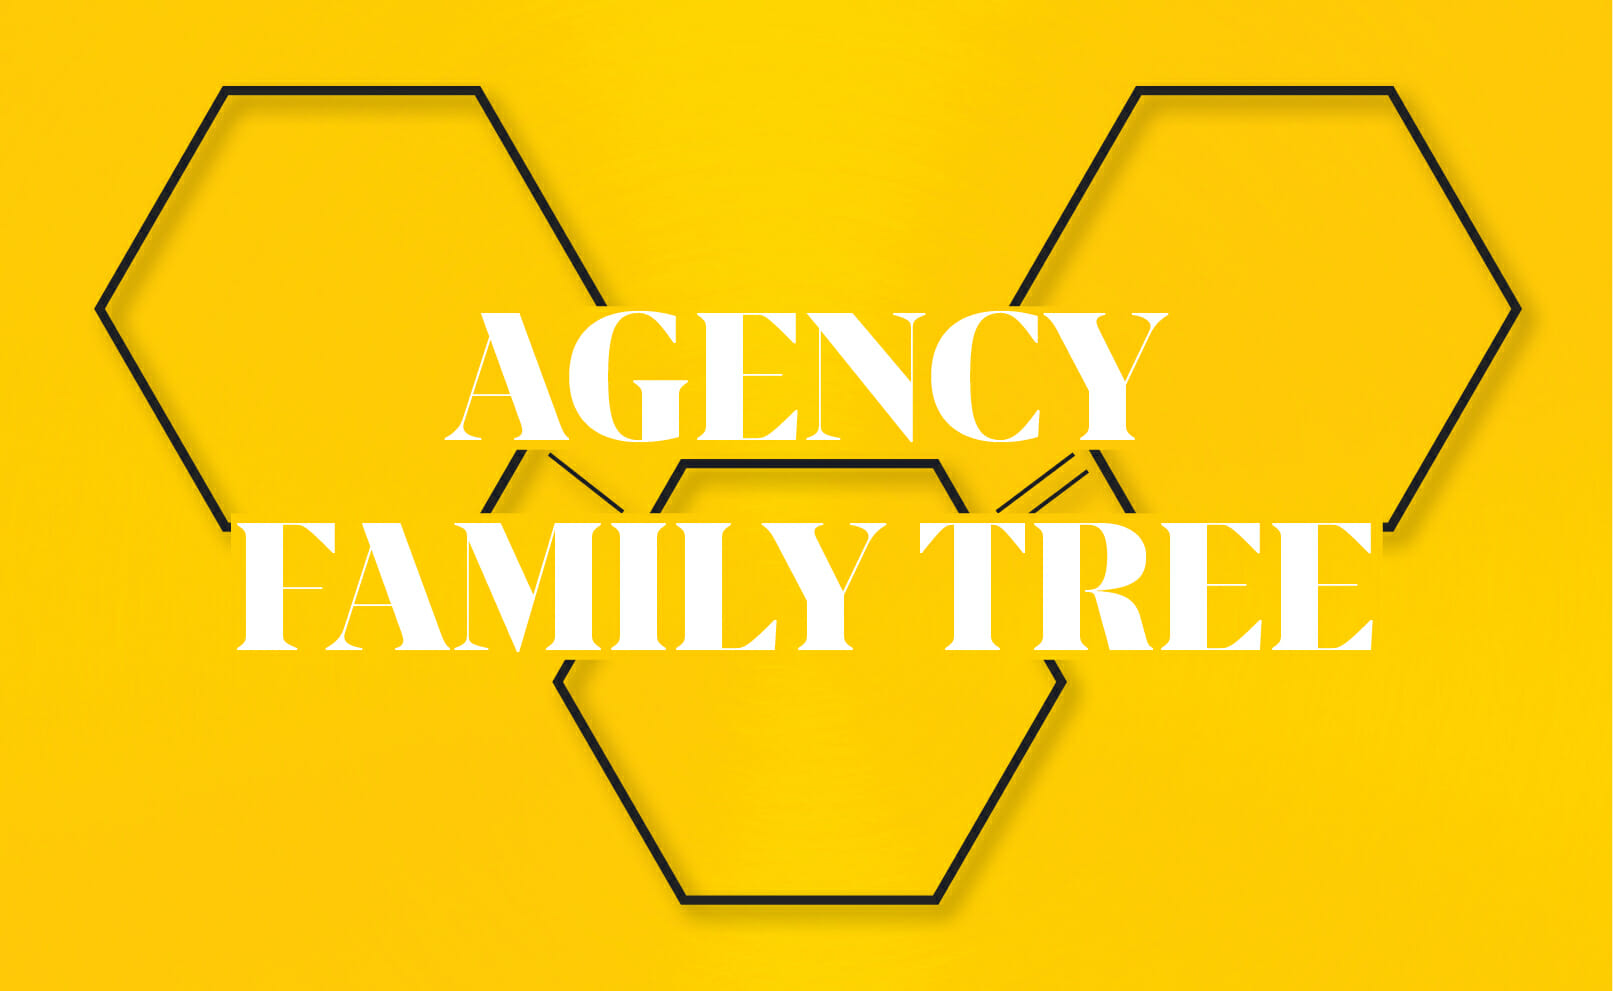 Interactive agency family tree 2018: the agency world in infographic form